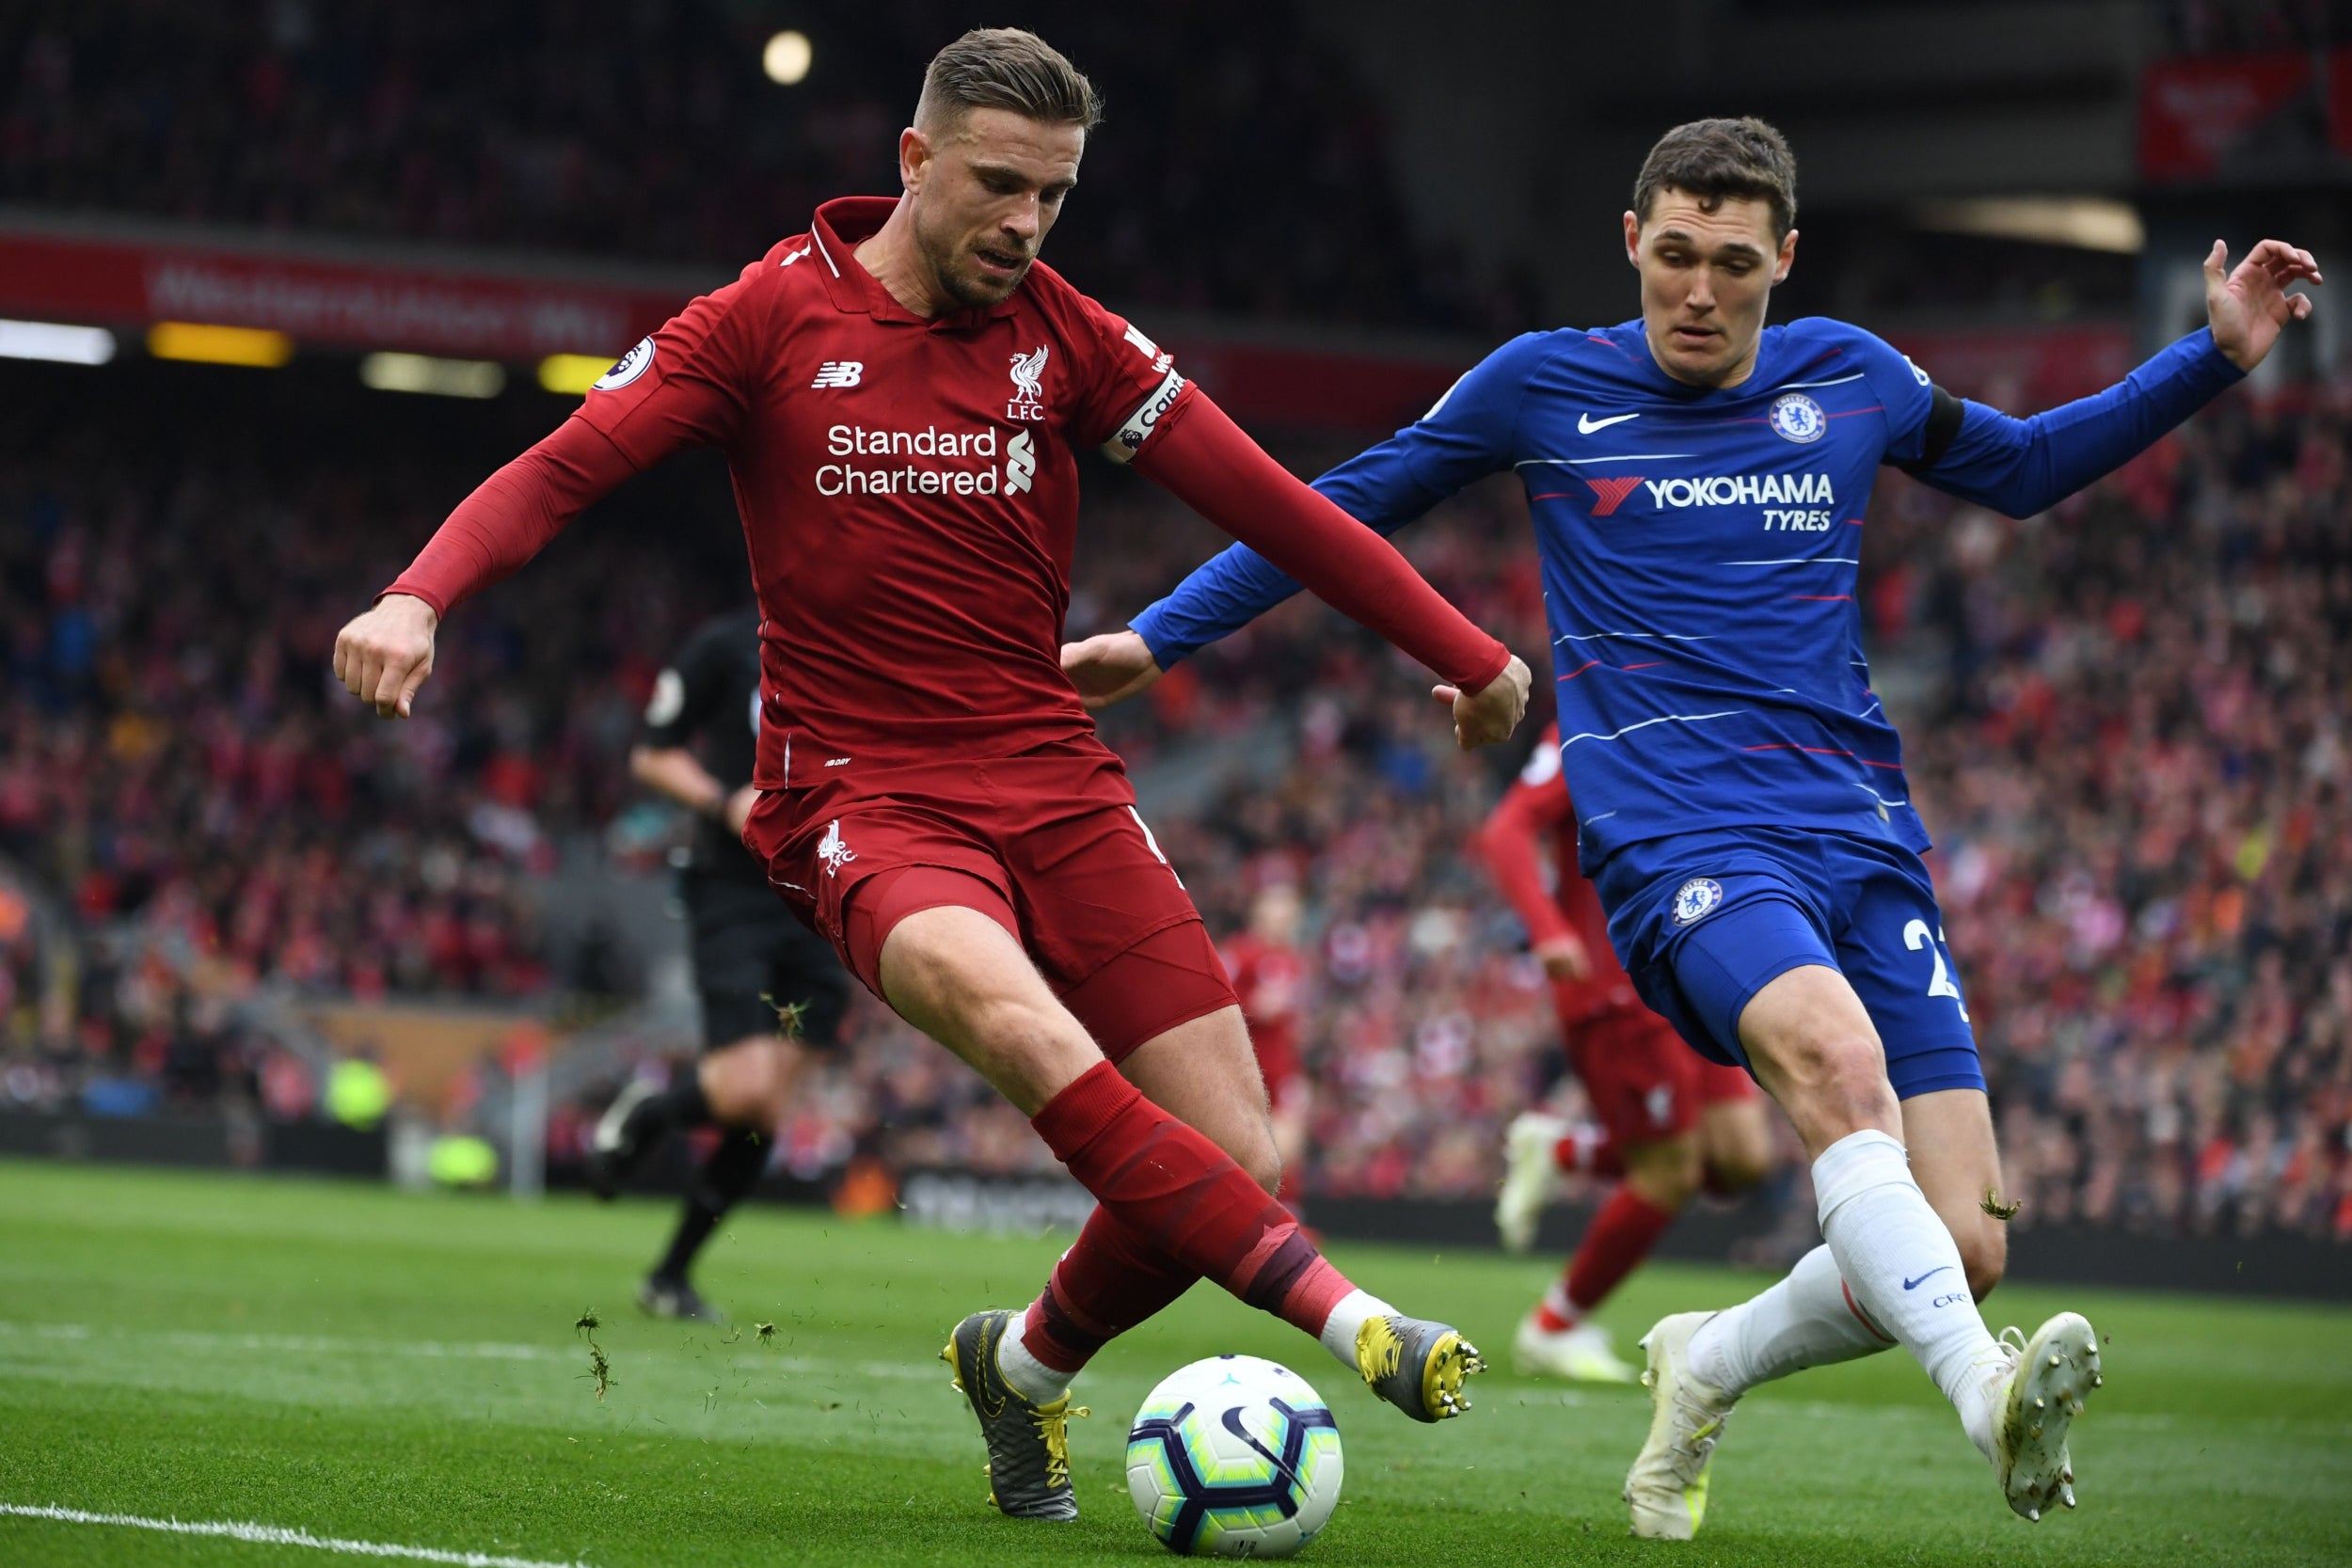 Liverpool vs Chelsea, player ratings: Reds captain Jordan Henderson stars in crucial victory ...